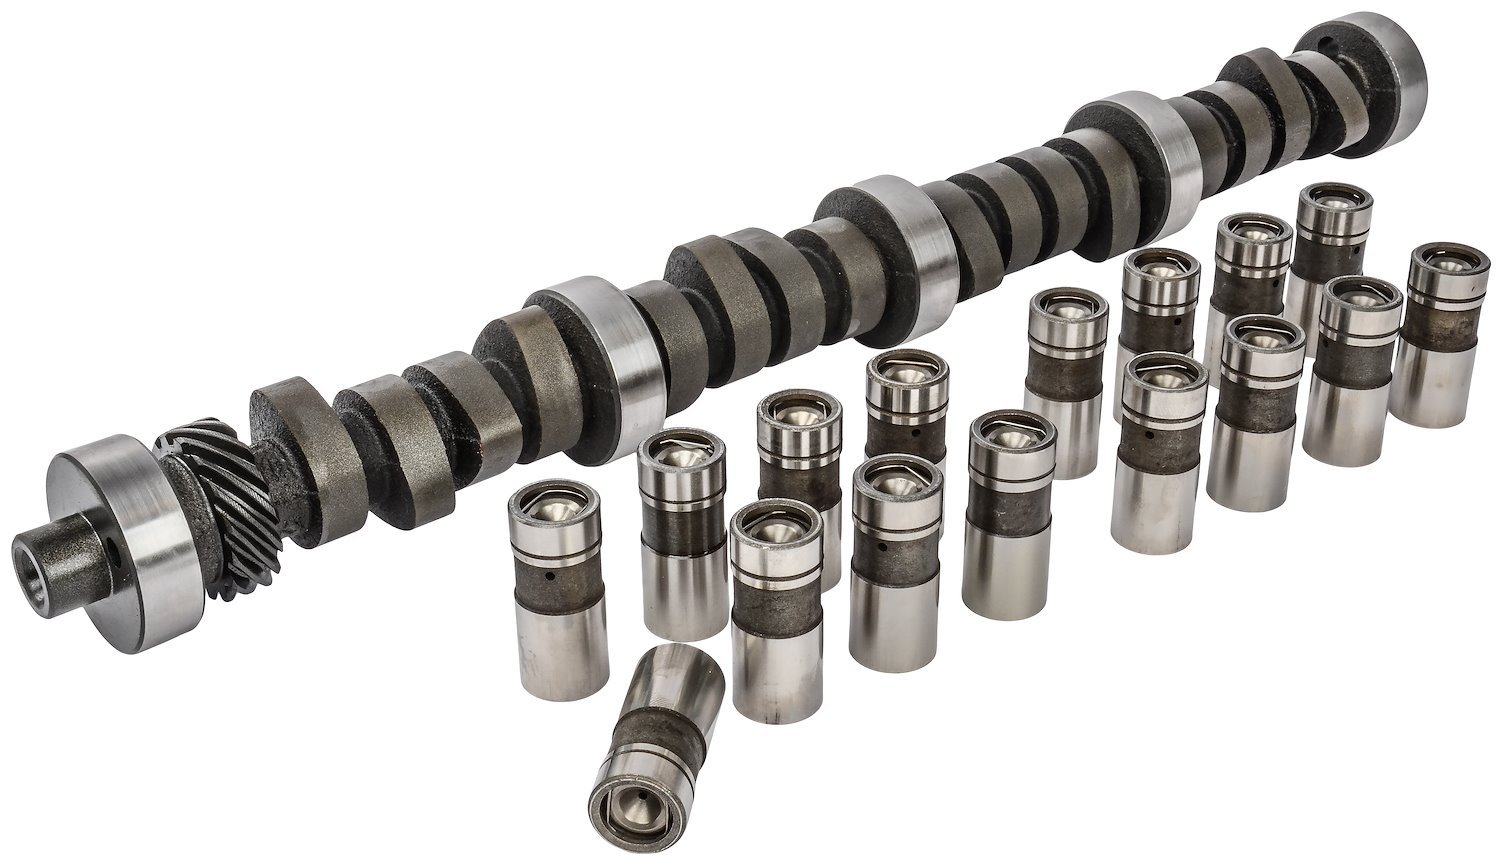 Hydraulic Flat Tappet Camshaft & Lifters for 1955-1981 Pontiac 262-455